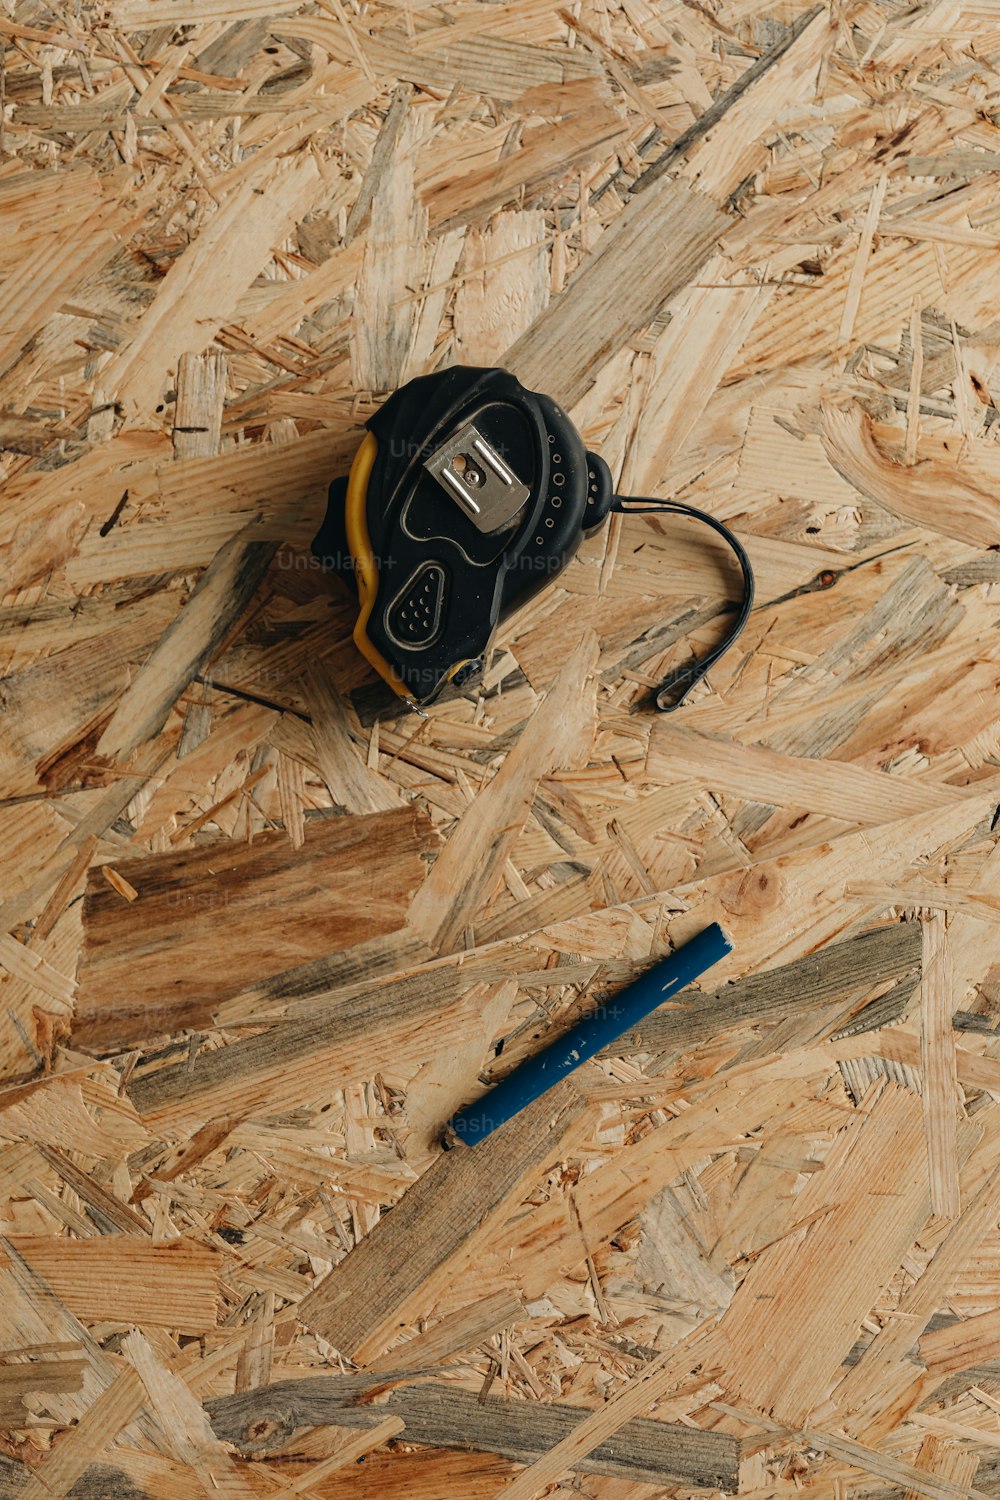 a pair of scissors and a tape measure on a wooden floor